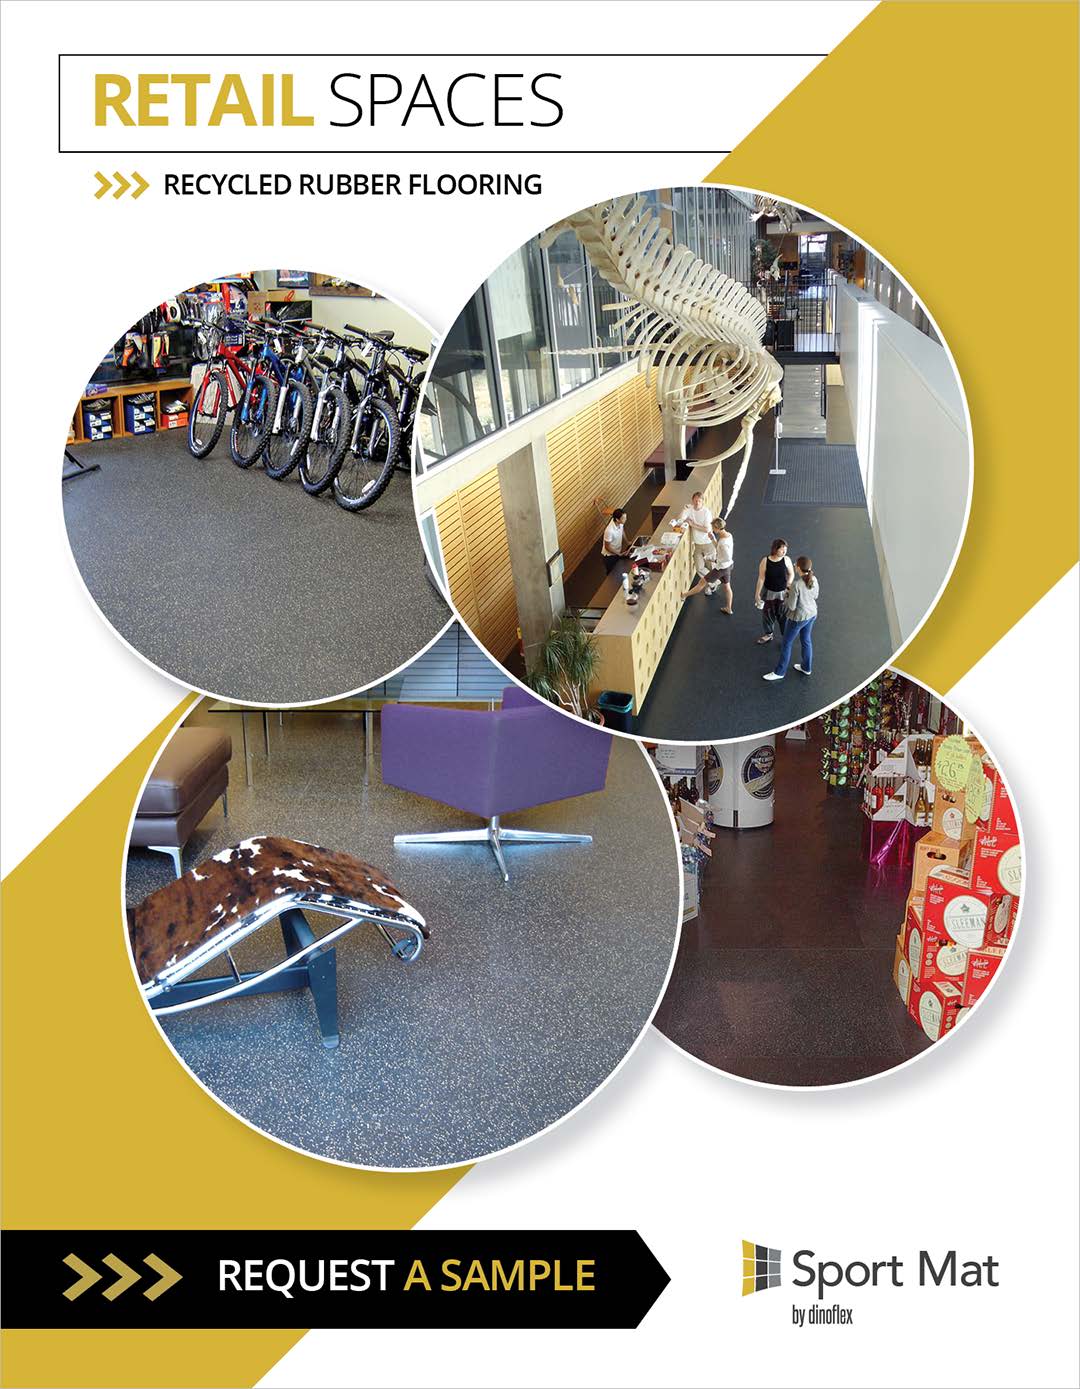 Why Choose Sport Mat Recycled Rubber Flooring for Retail Spaces